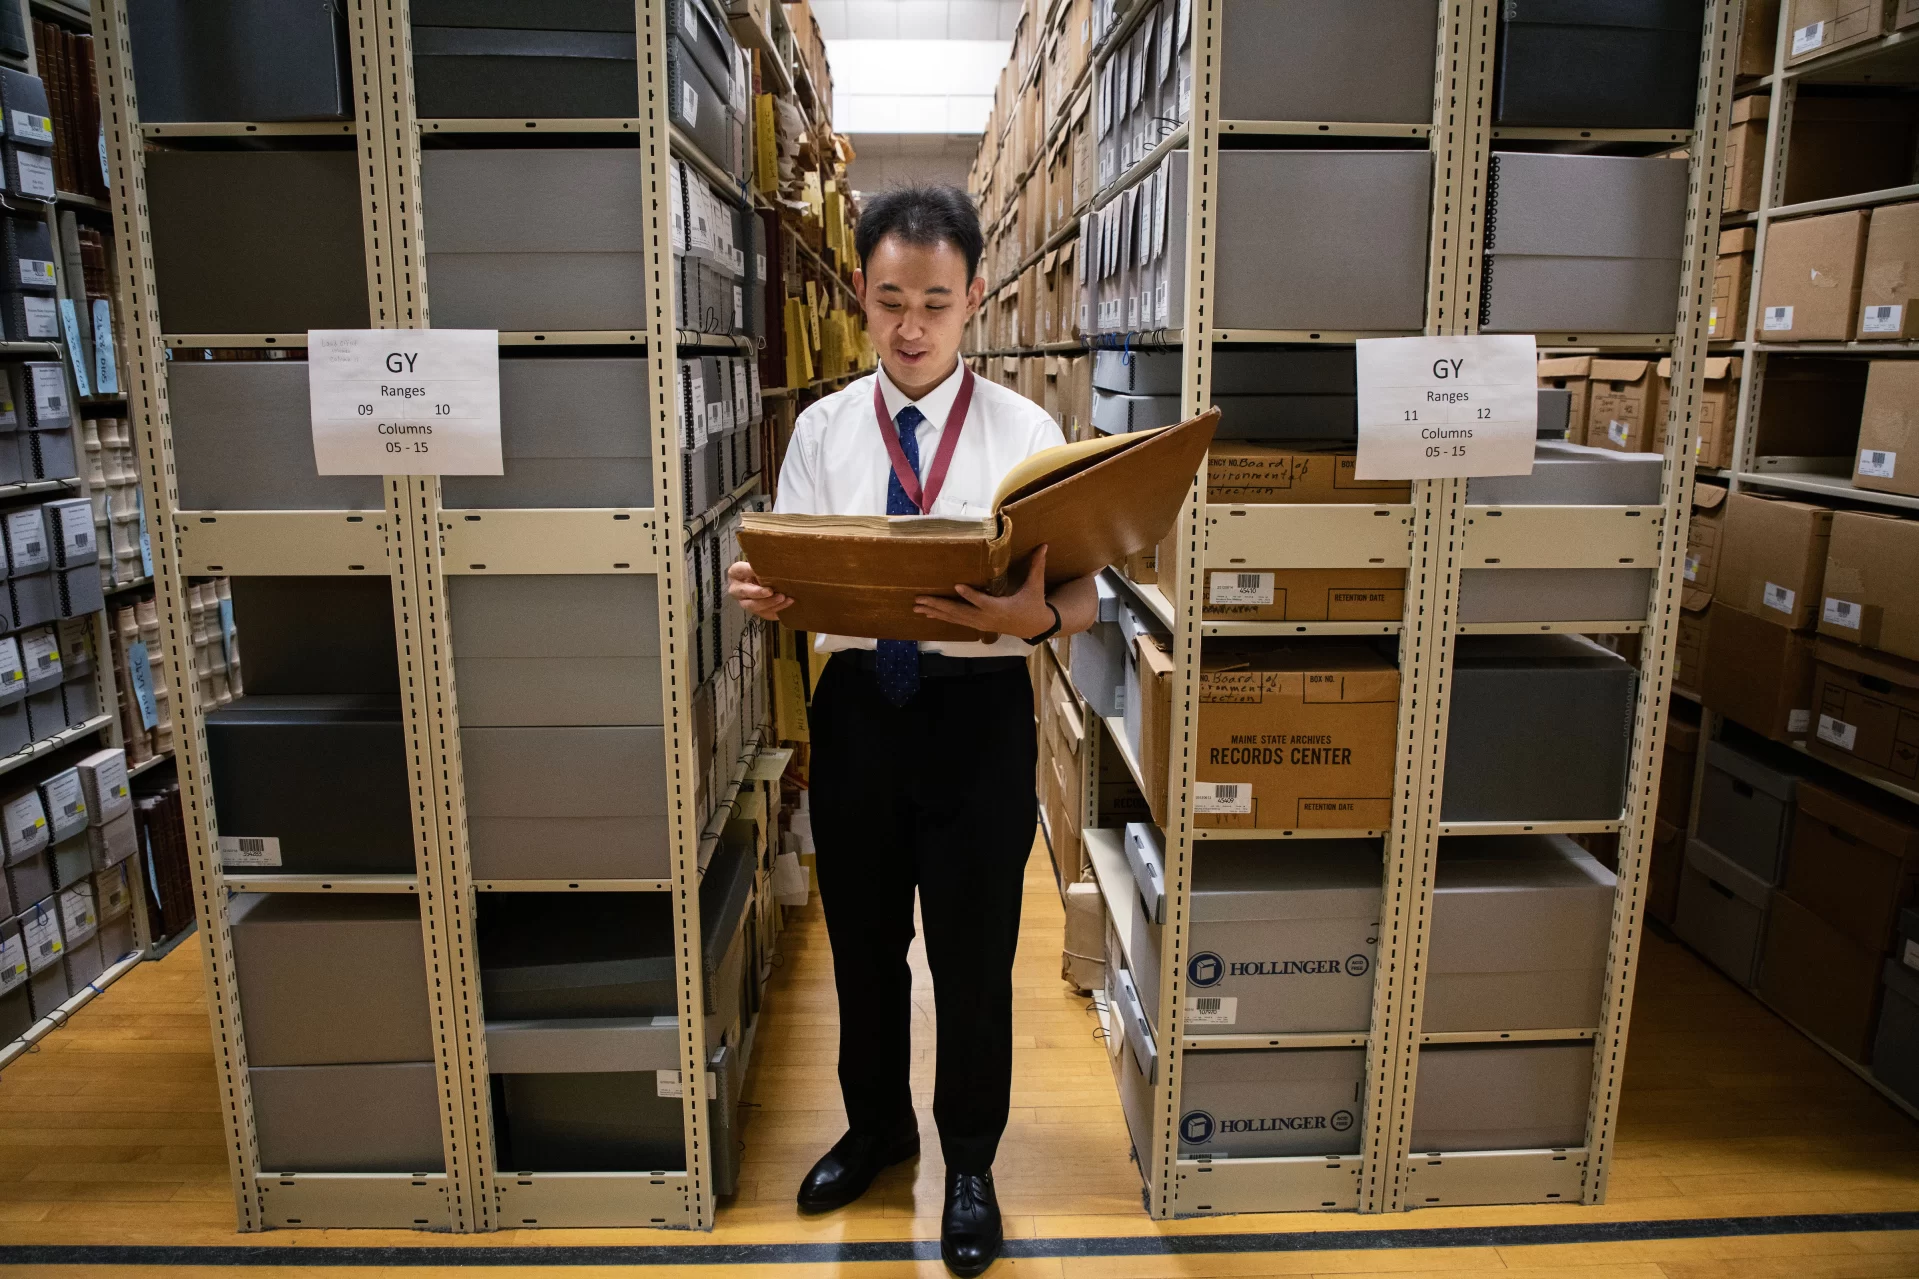 Alan Wang ‘24 of China, poses for a portrait at the Maine State Archives on July 20, 2023.

Portraits were shot at The Maine State Archives temporary offices while the Maine State Cultural Building is renovated. (Theophil Syslo | Bates College)